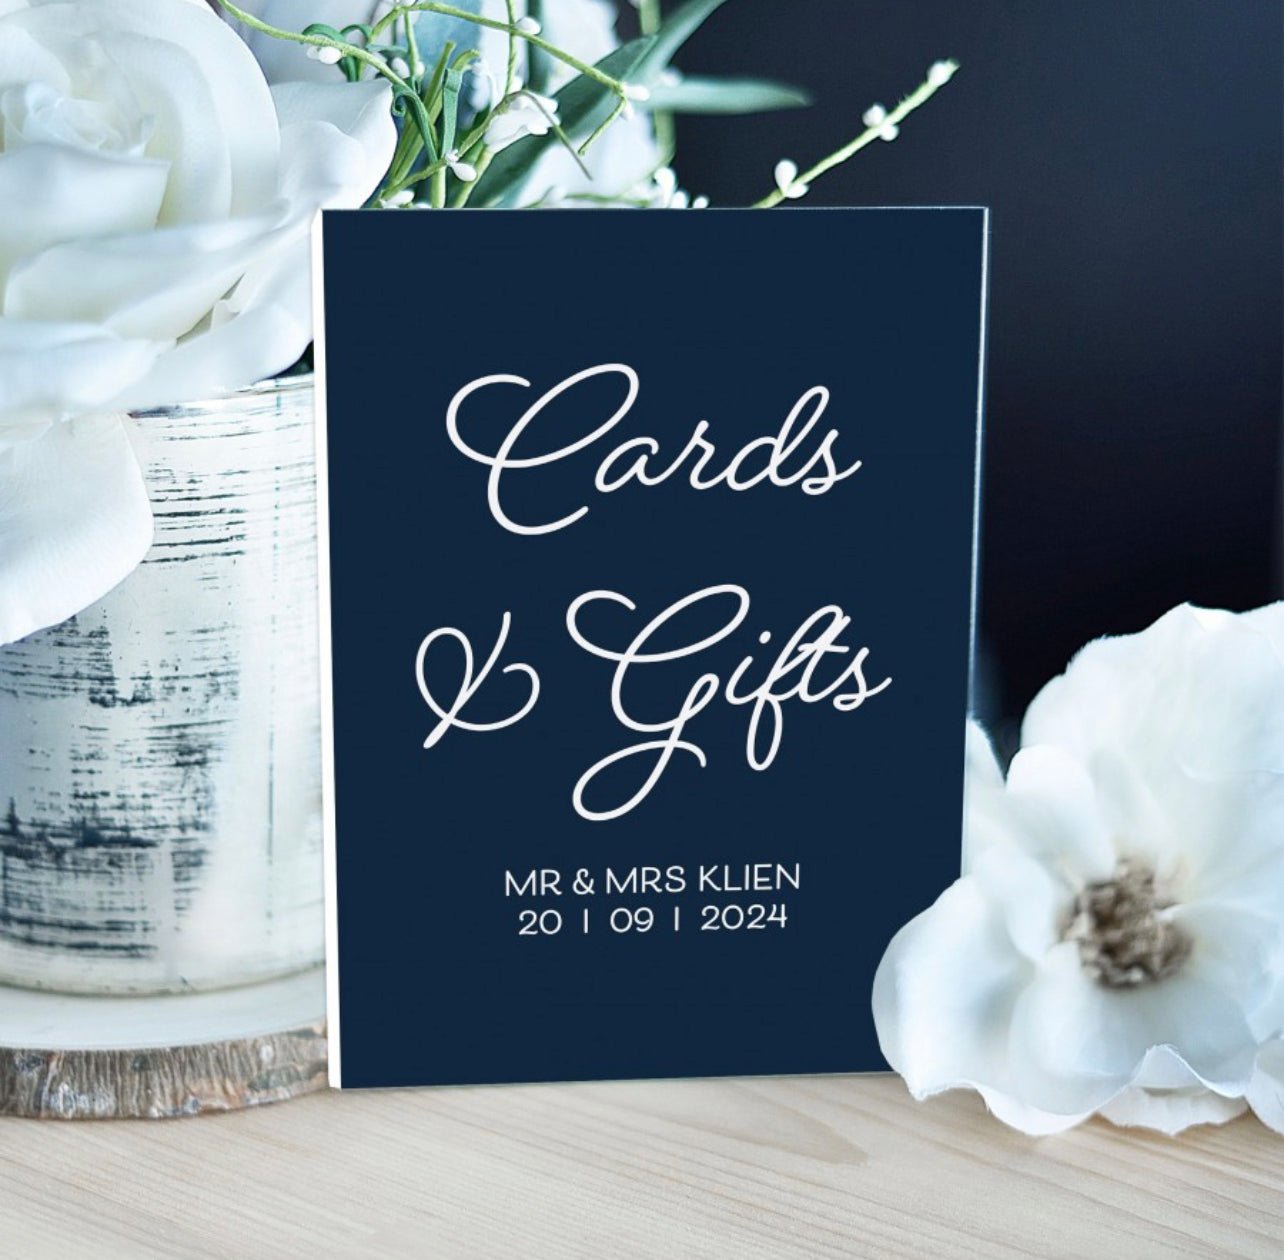 Muted Matte Cards & Gifts Sign - Cute as a Button by Laura